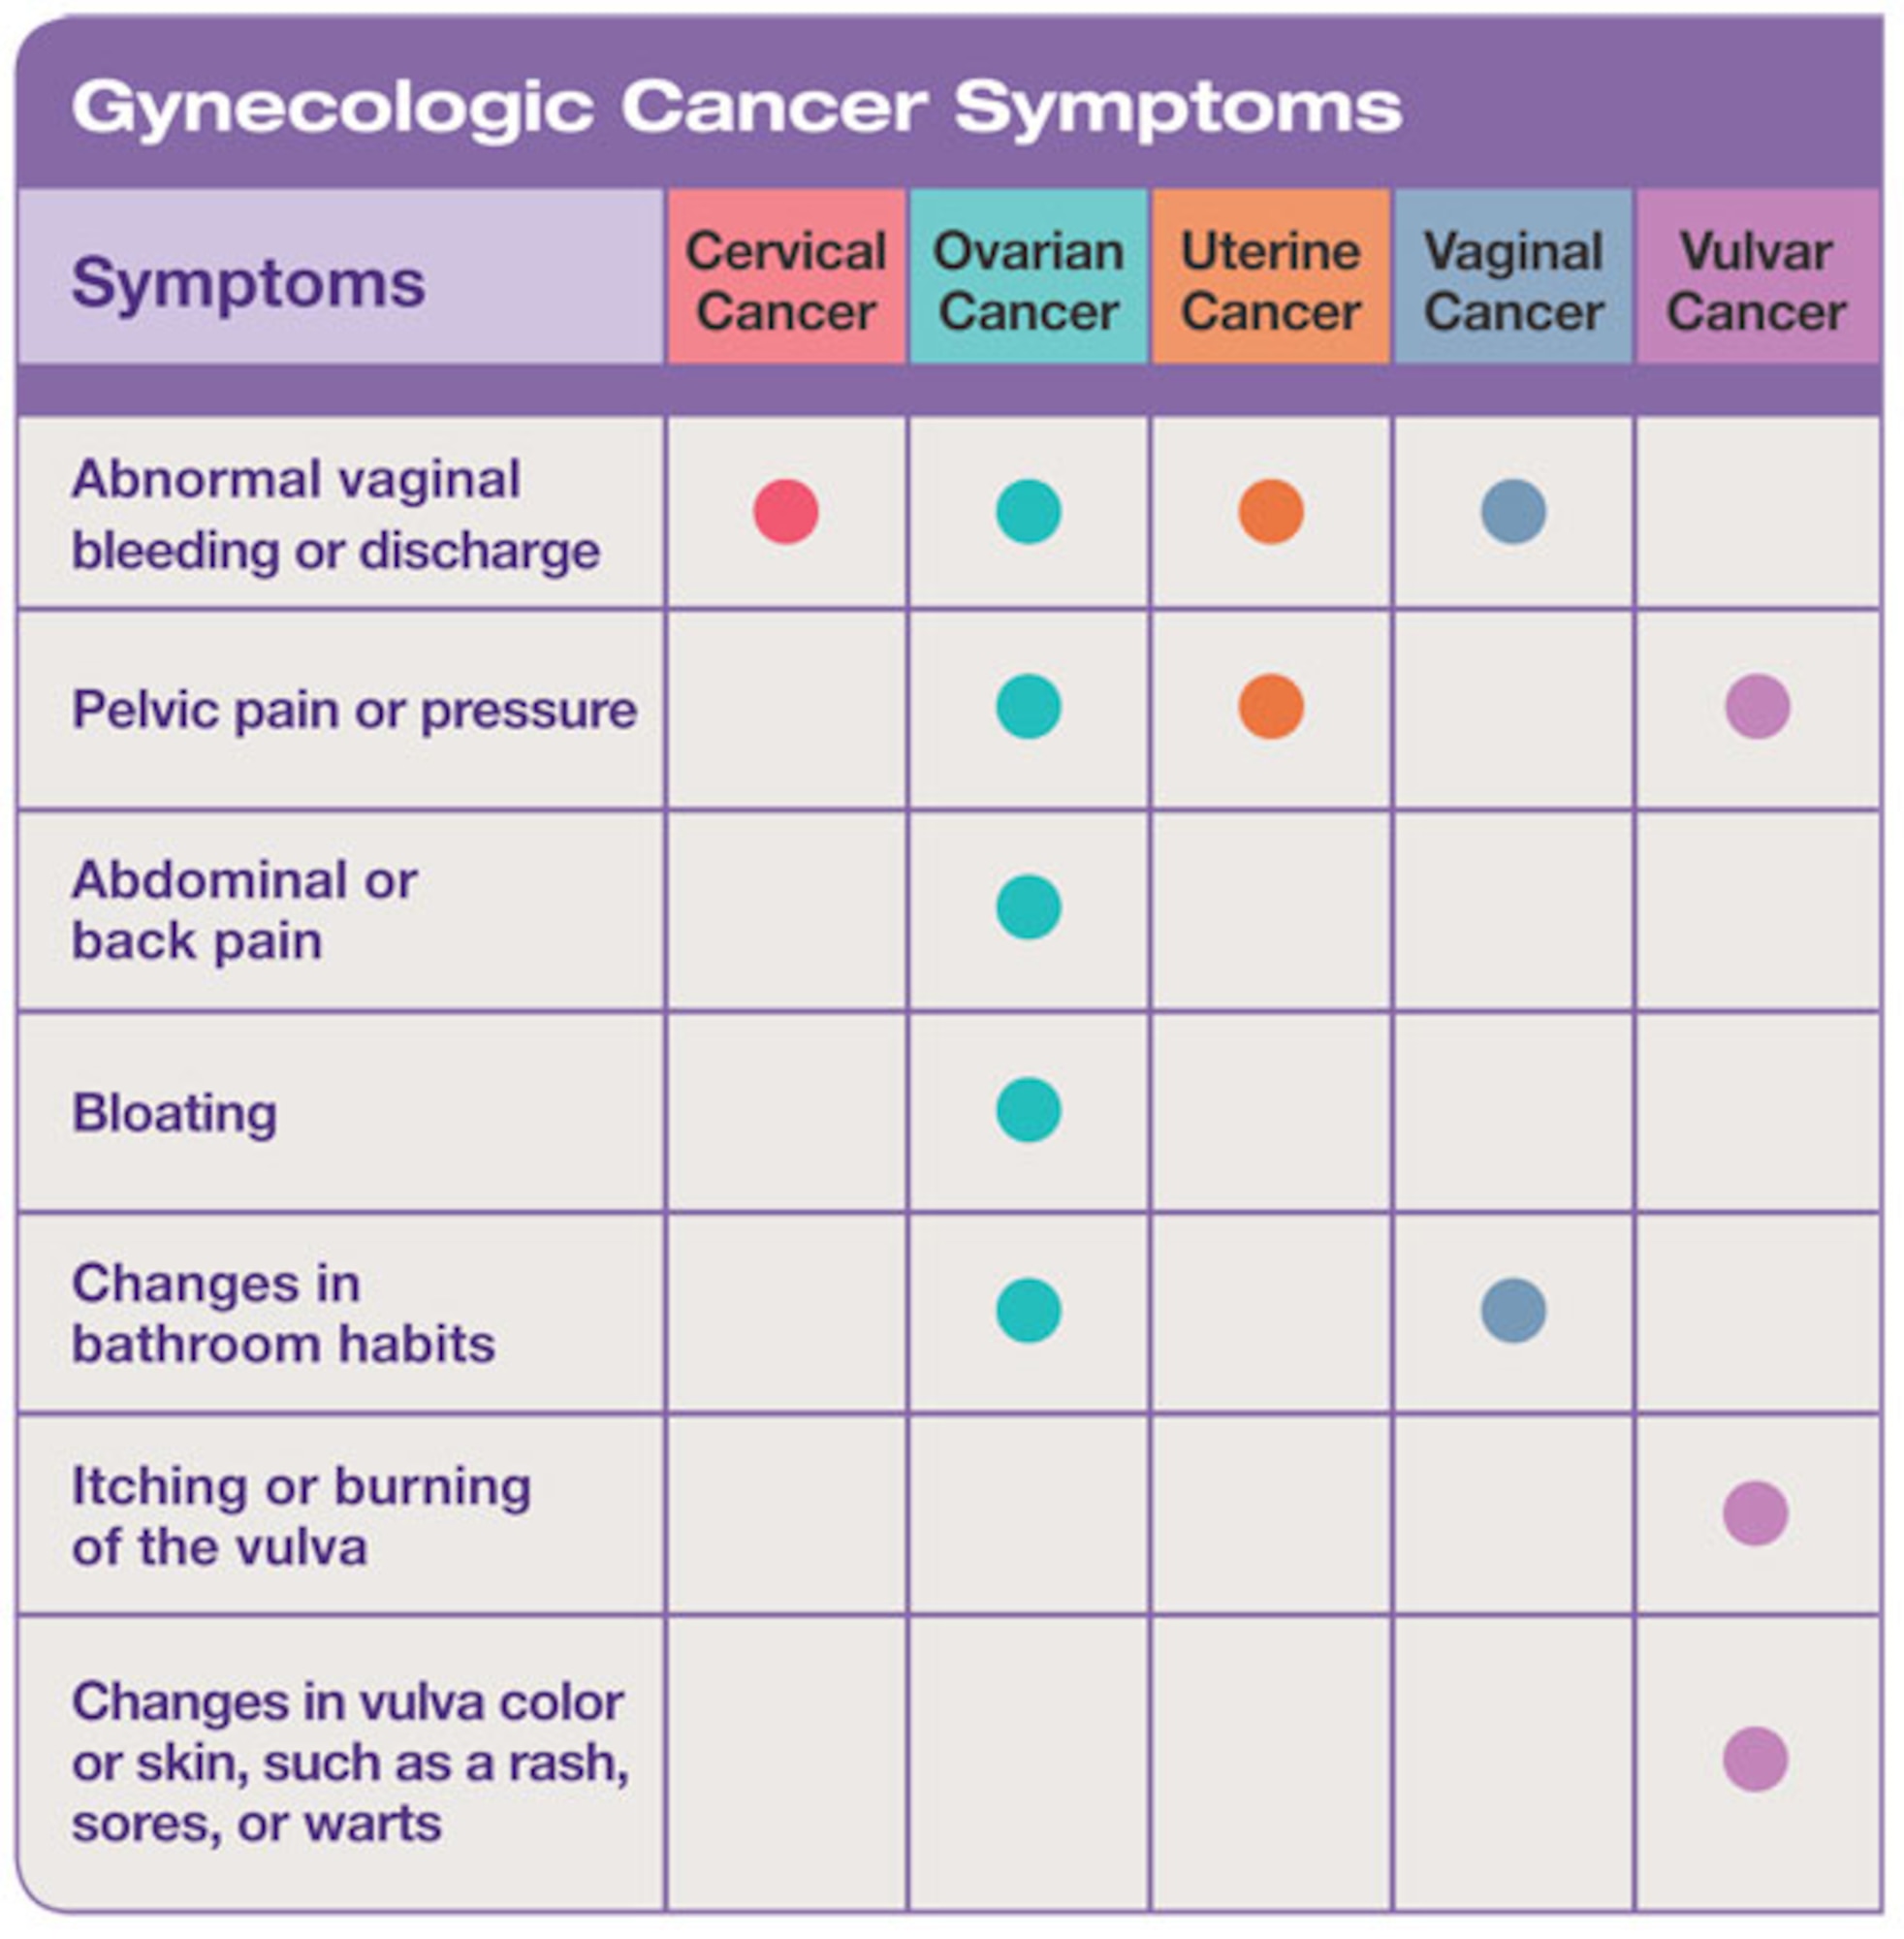 The signs for cervical cancer can be hard to detect. Women should check with their doctor if any of these symptoms are present. (Graphic courtesy of Centers for Disease Control and Prevention)